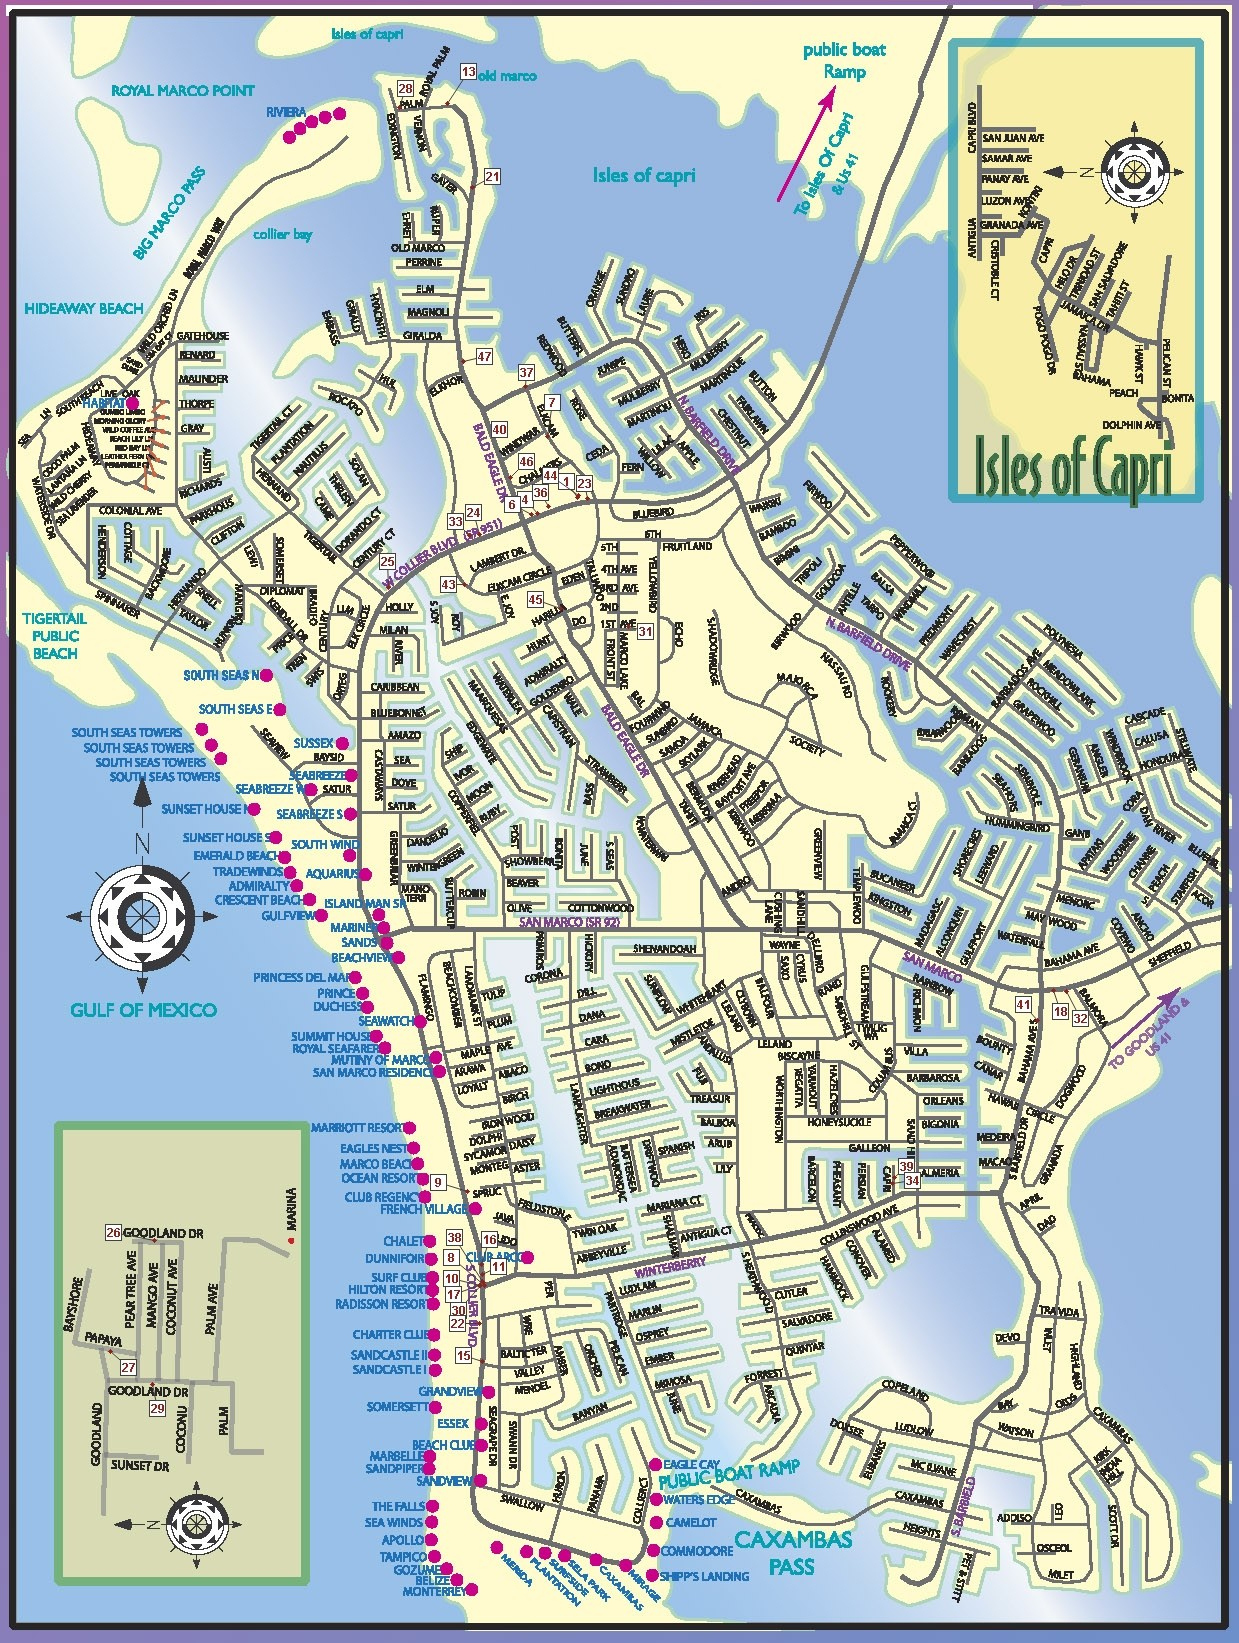 Naples Trolley Route Map Fav Places In My Home State florida 